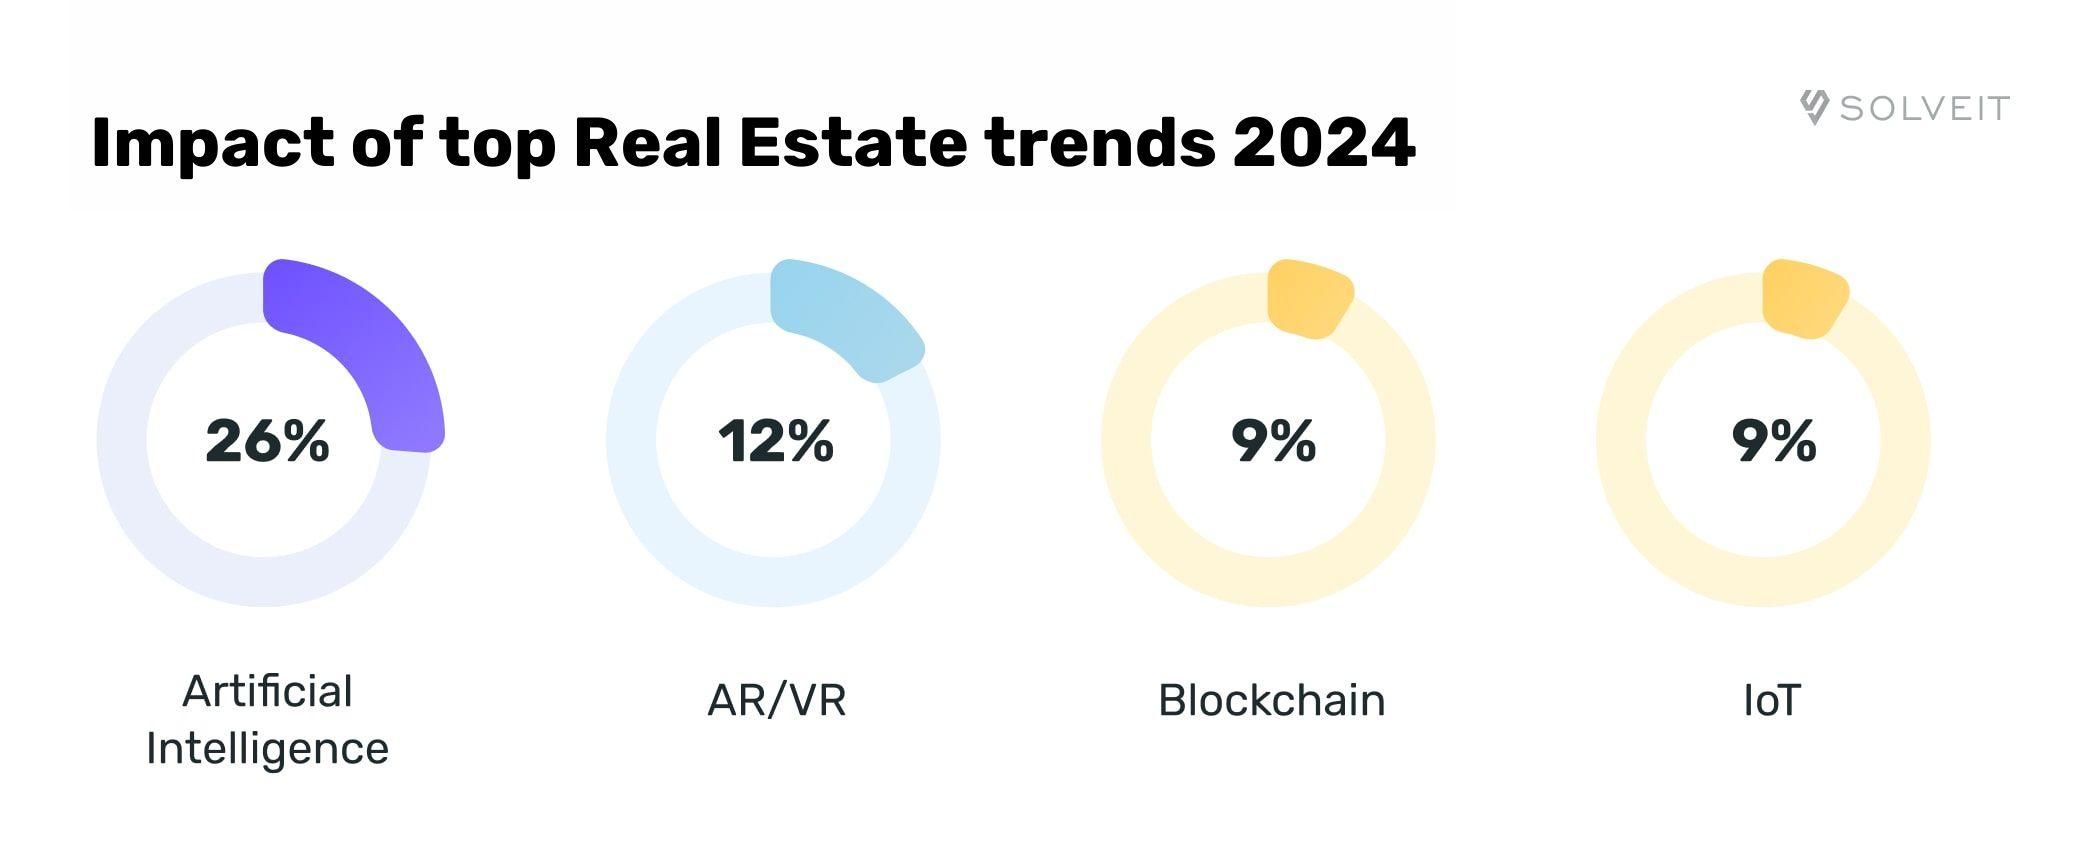 Impact of Top Real Estate Trends 2024